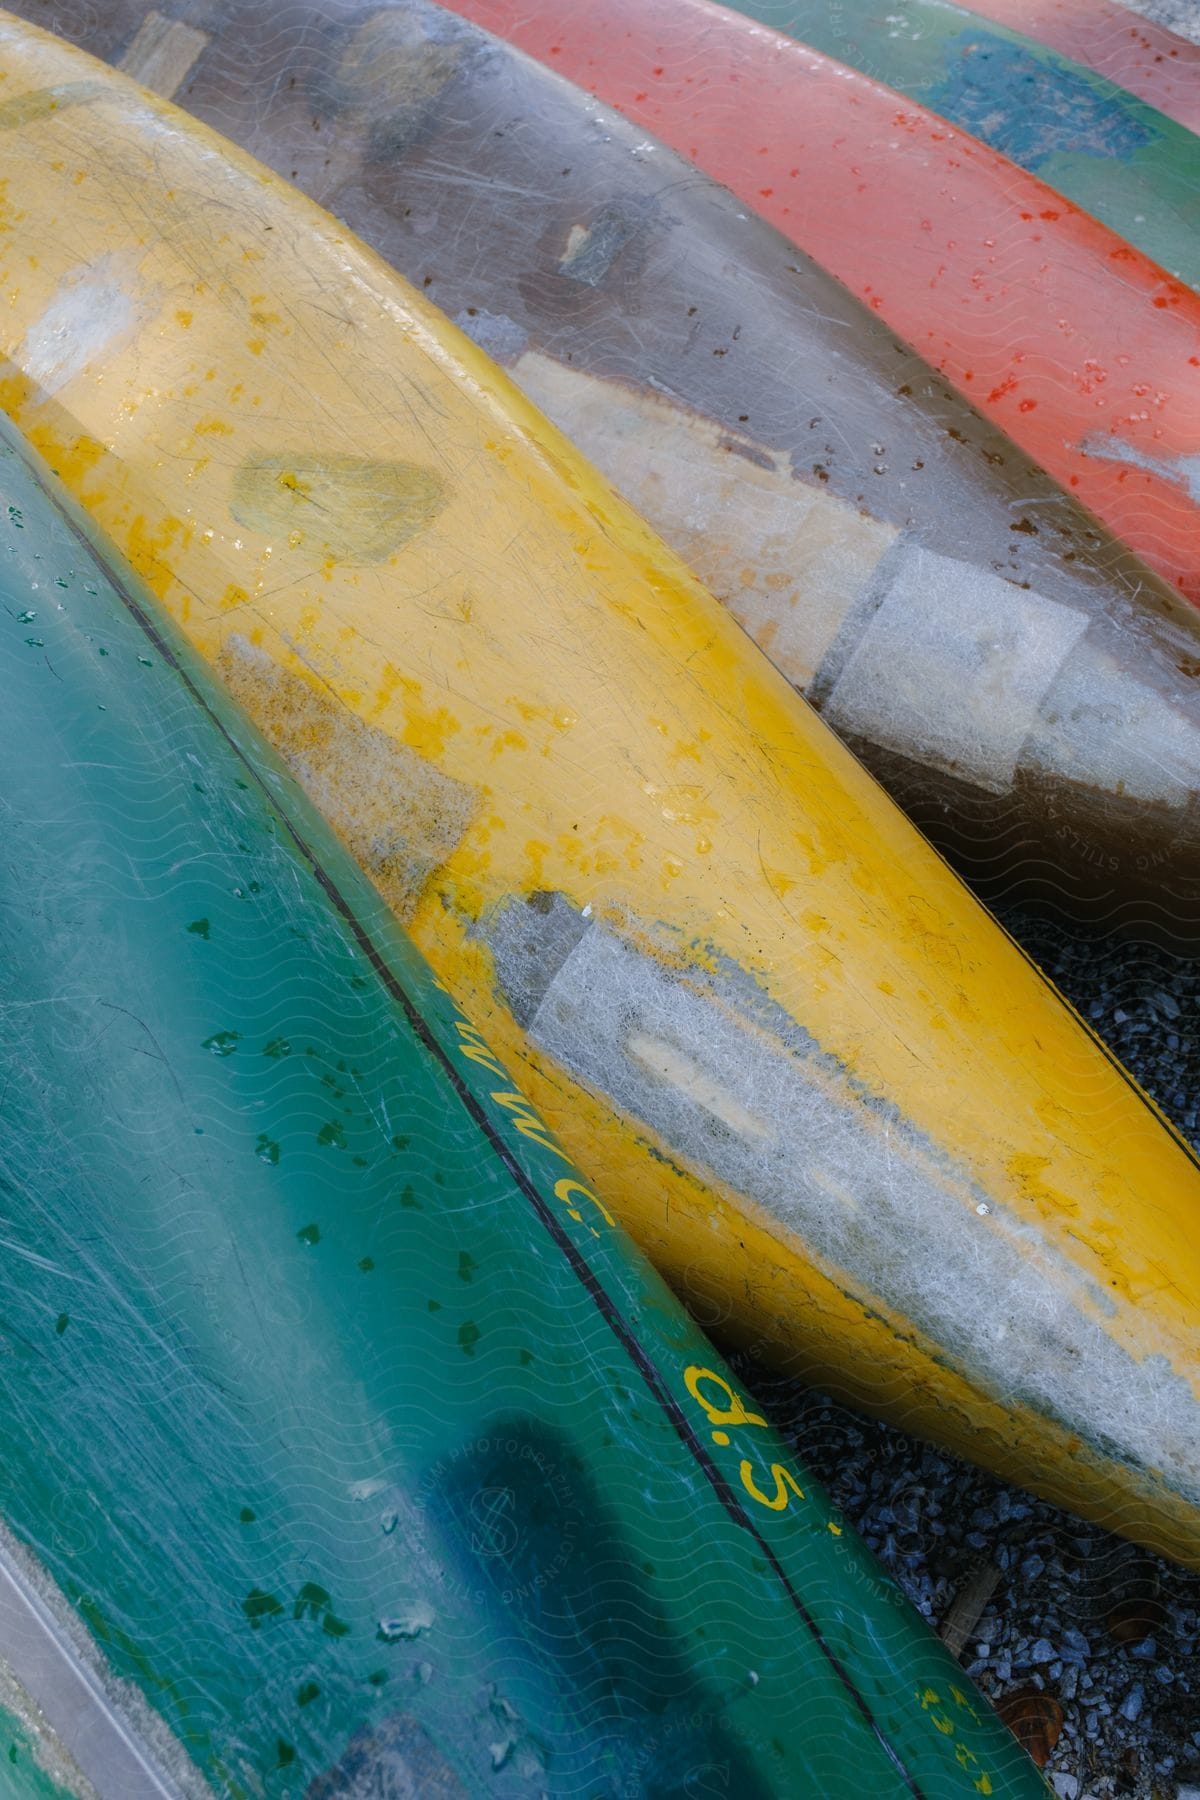 Kayaks of varying colors lined up on pebbles.